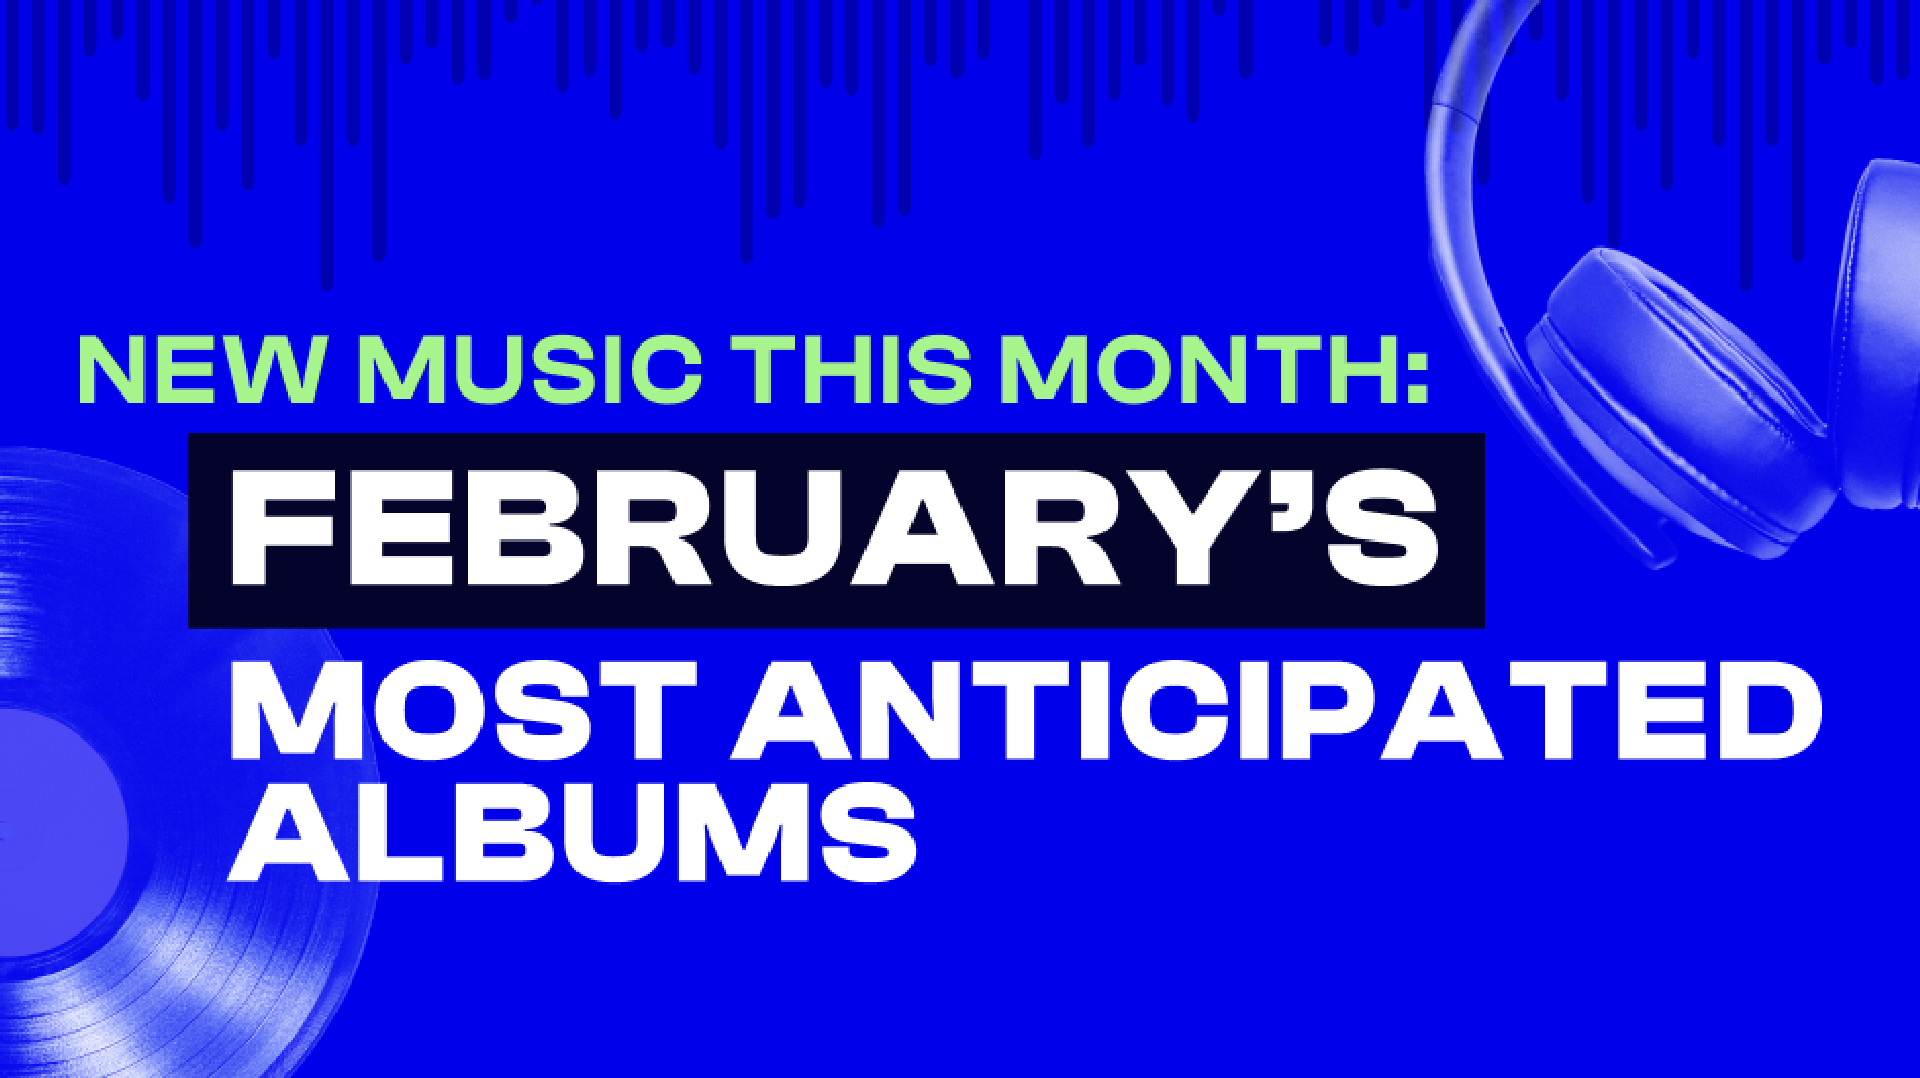 New Music This Month: February's Most Anticipated Albums